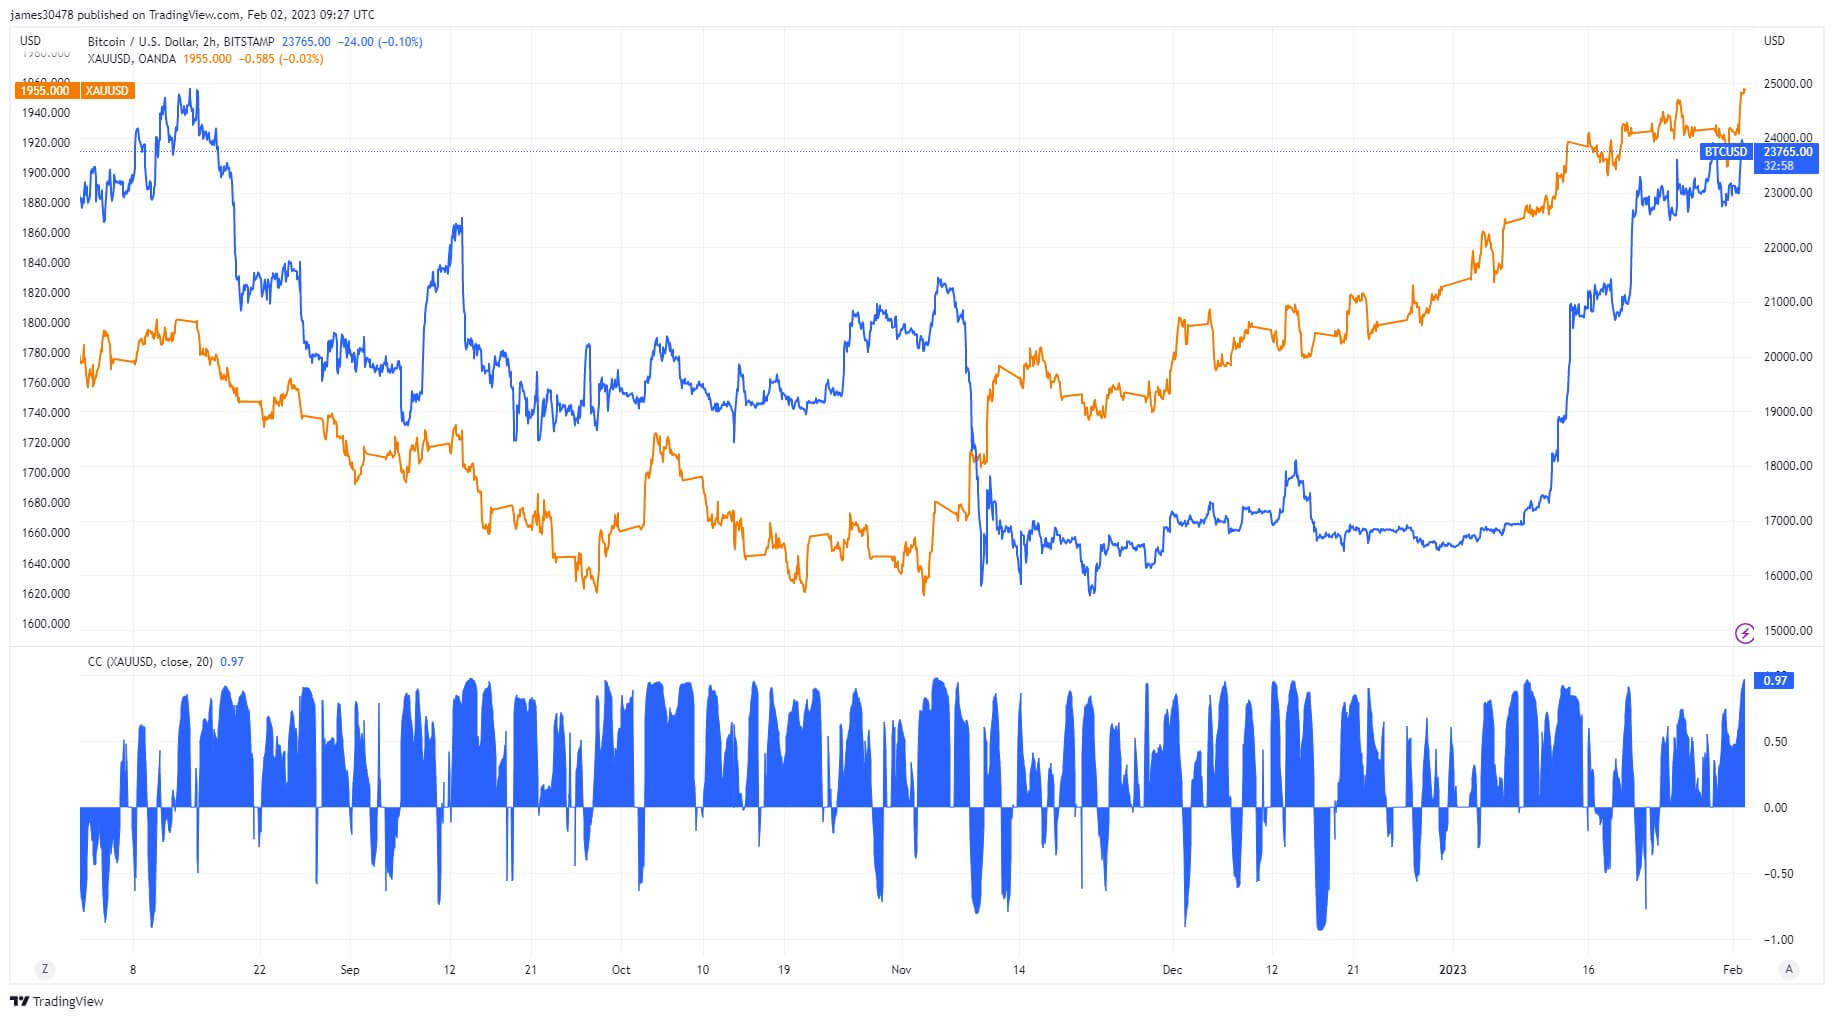 The Fed made the expected 25bps hike, both gold and Bitcoin surged on the news  highest correlation in 6 months